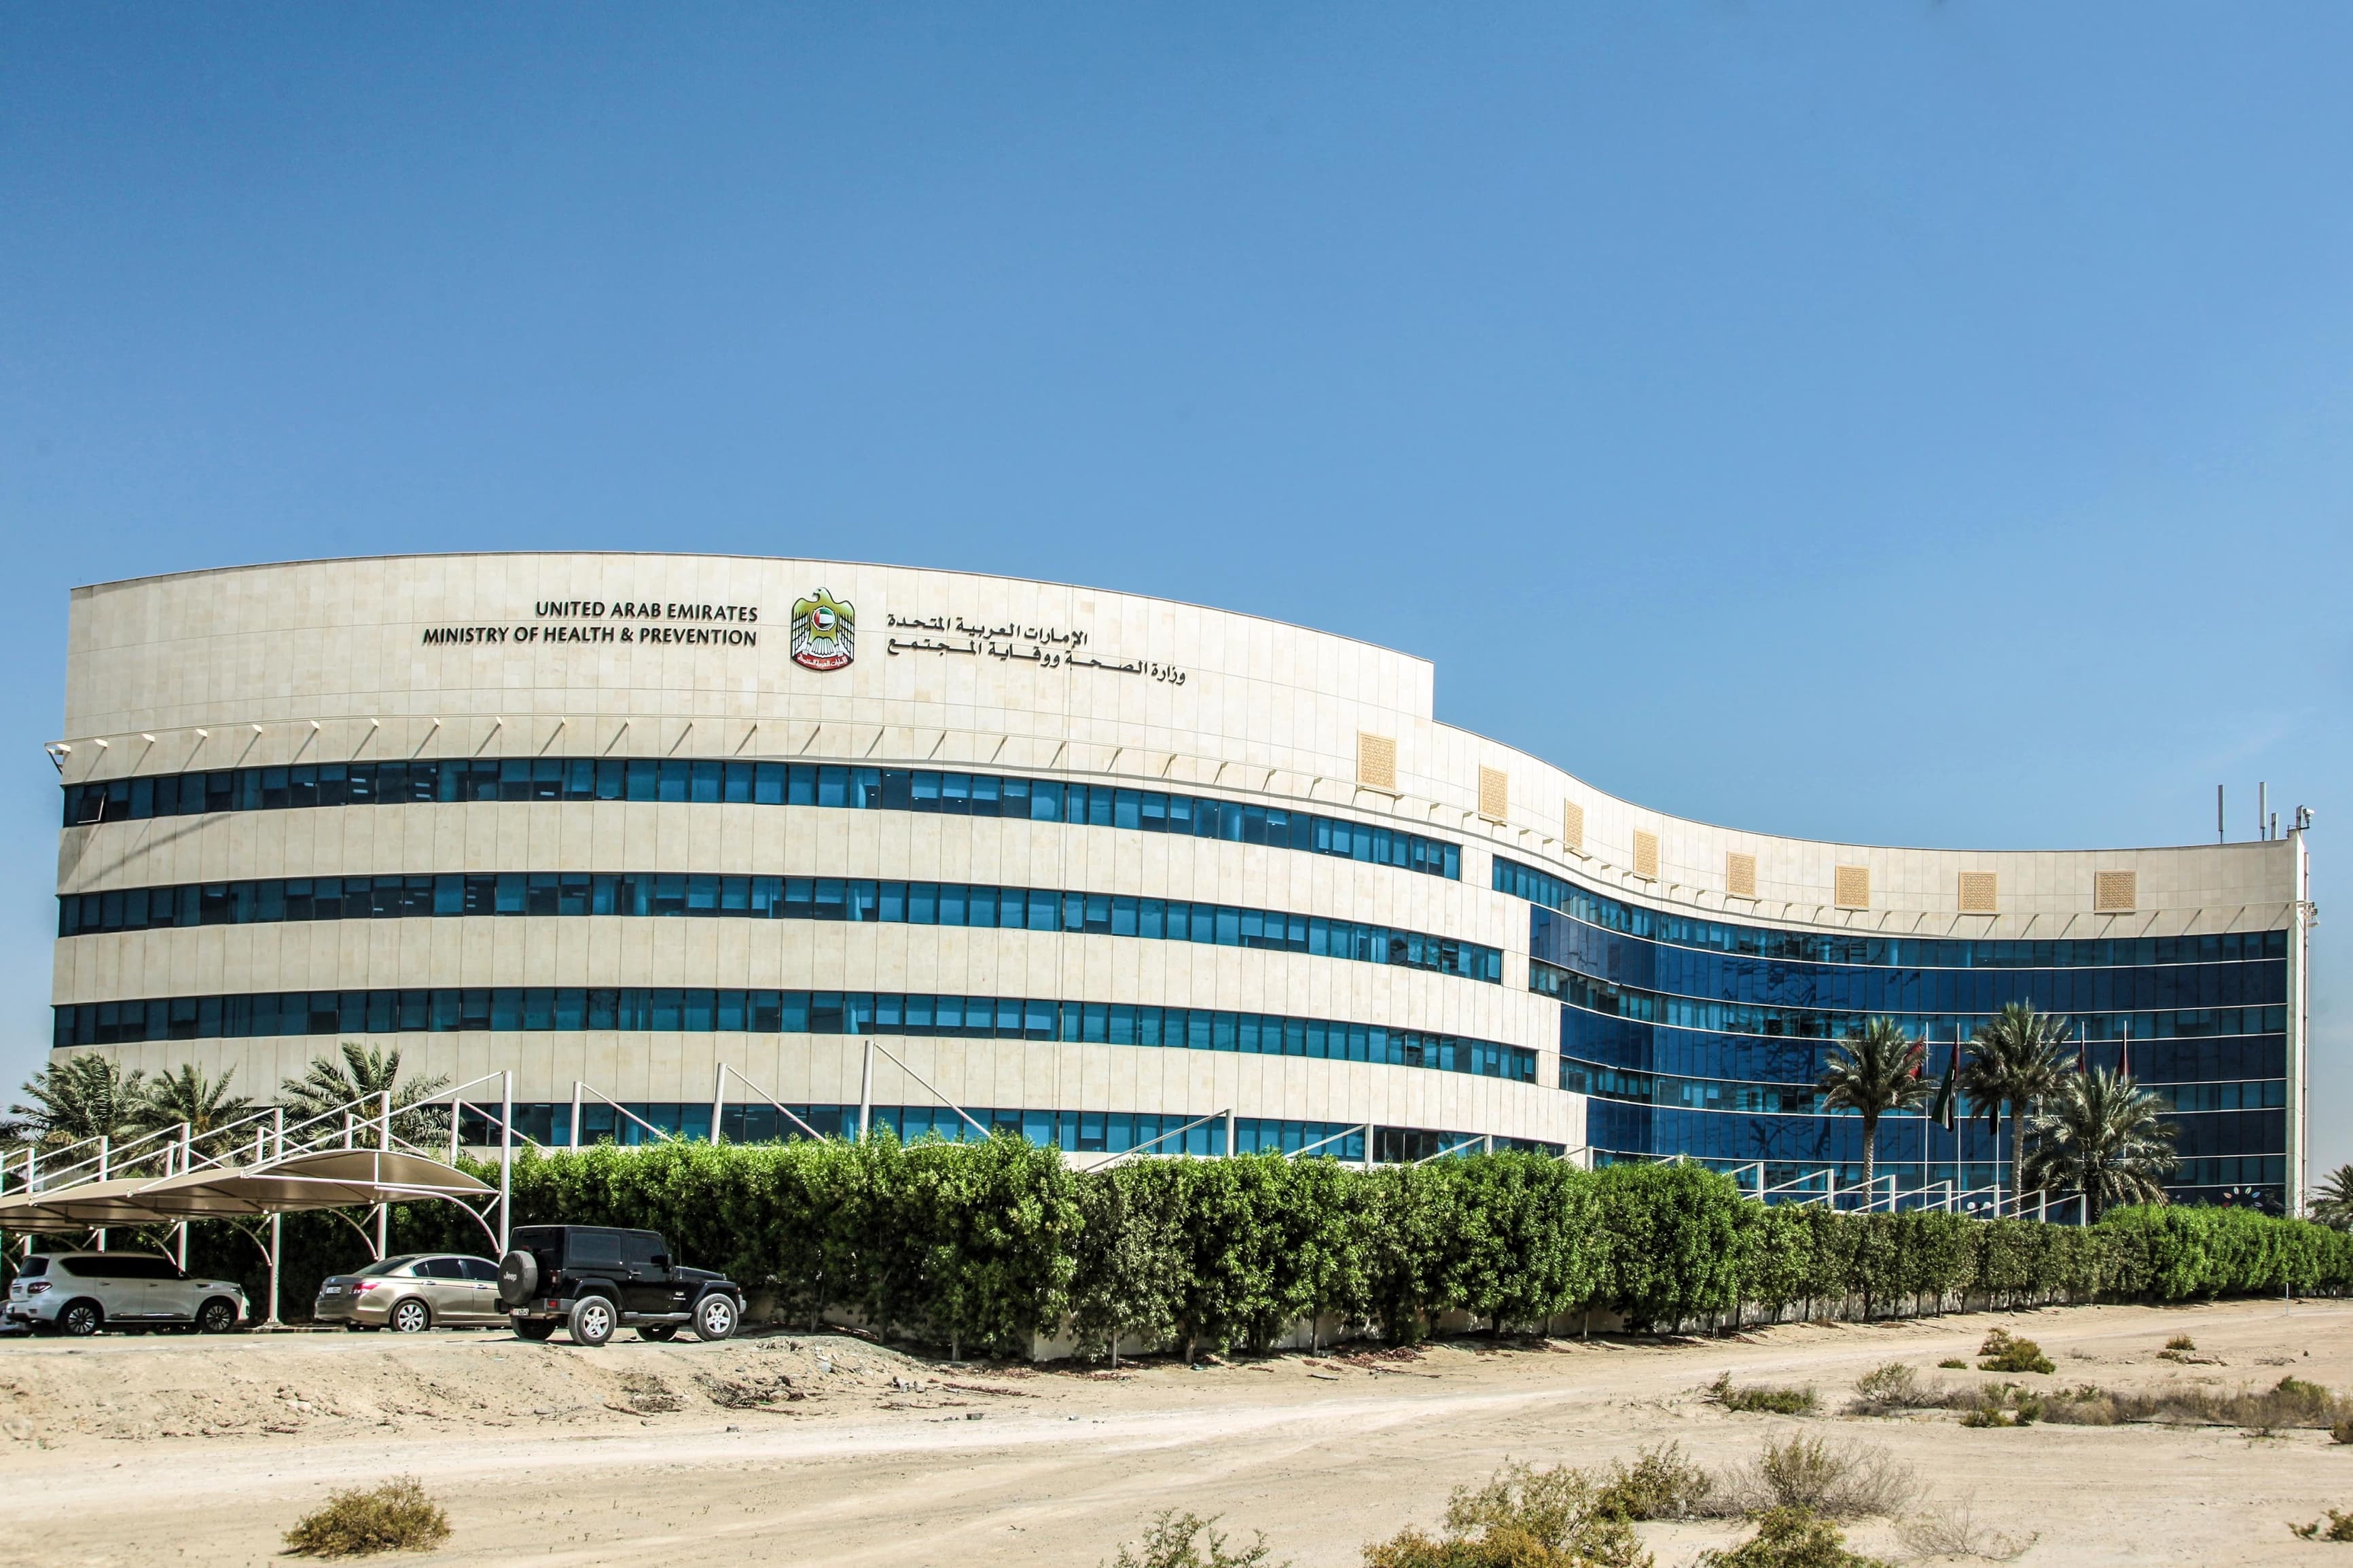 Two new services launched by the UAE health ministry